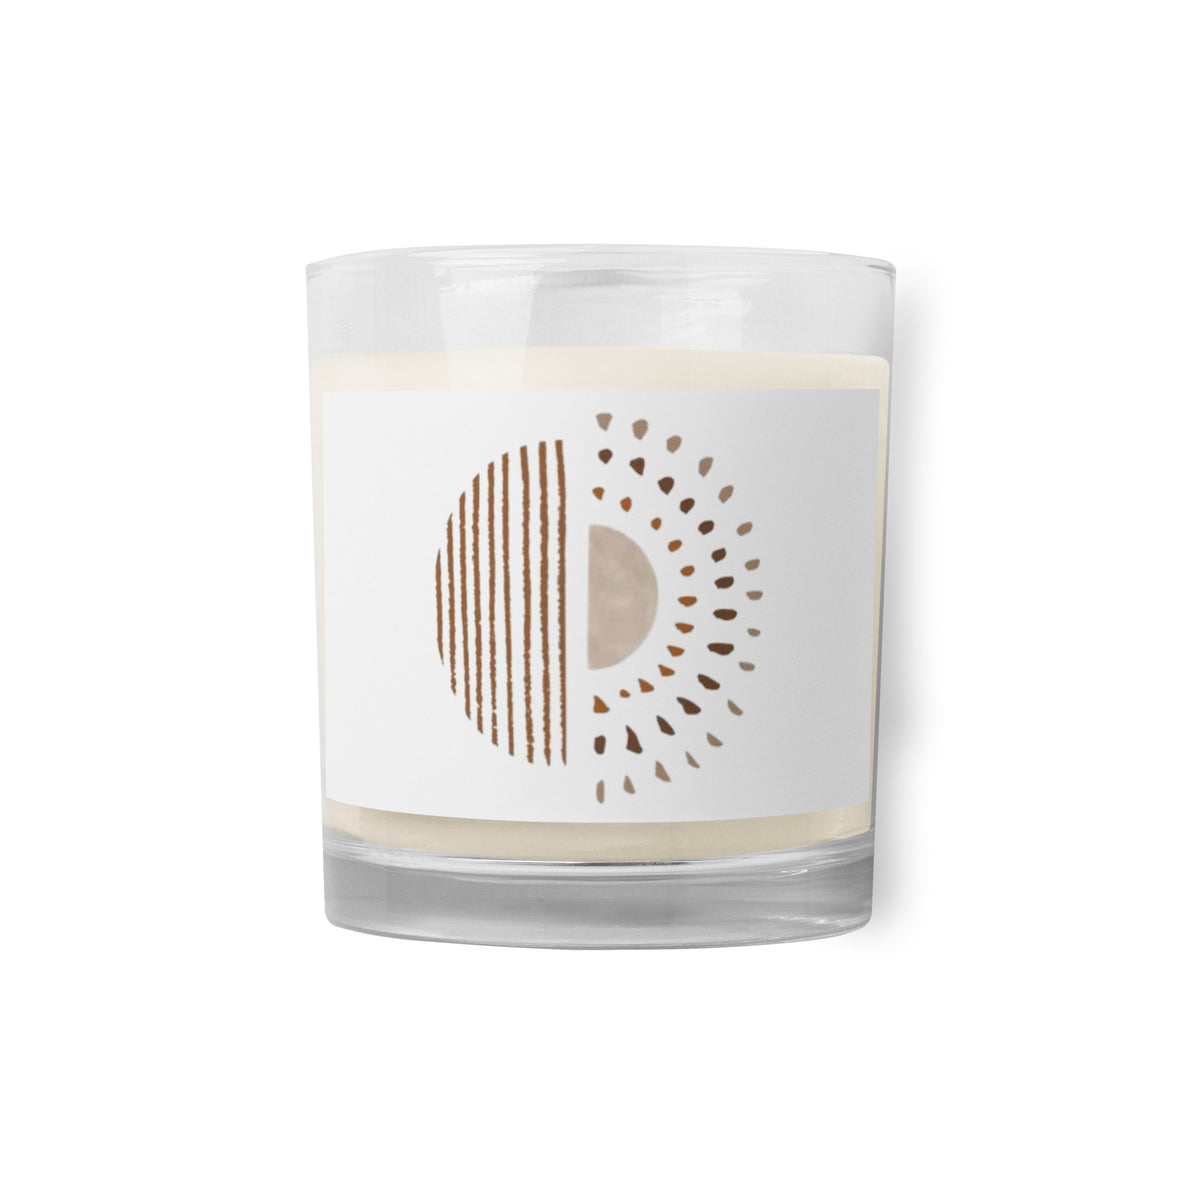 Glass jar soy wax candle Veronica Jeans